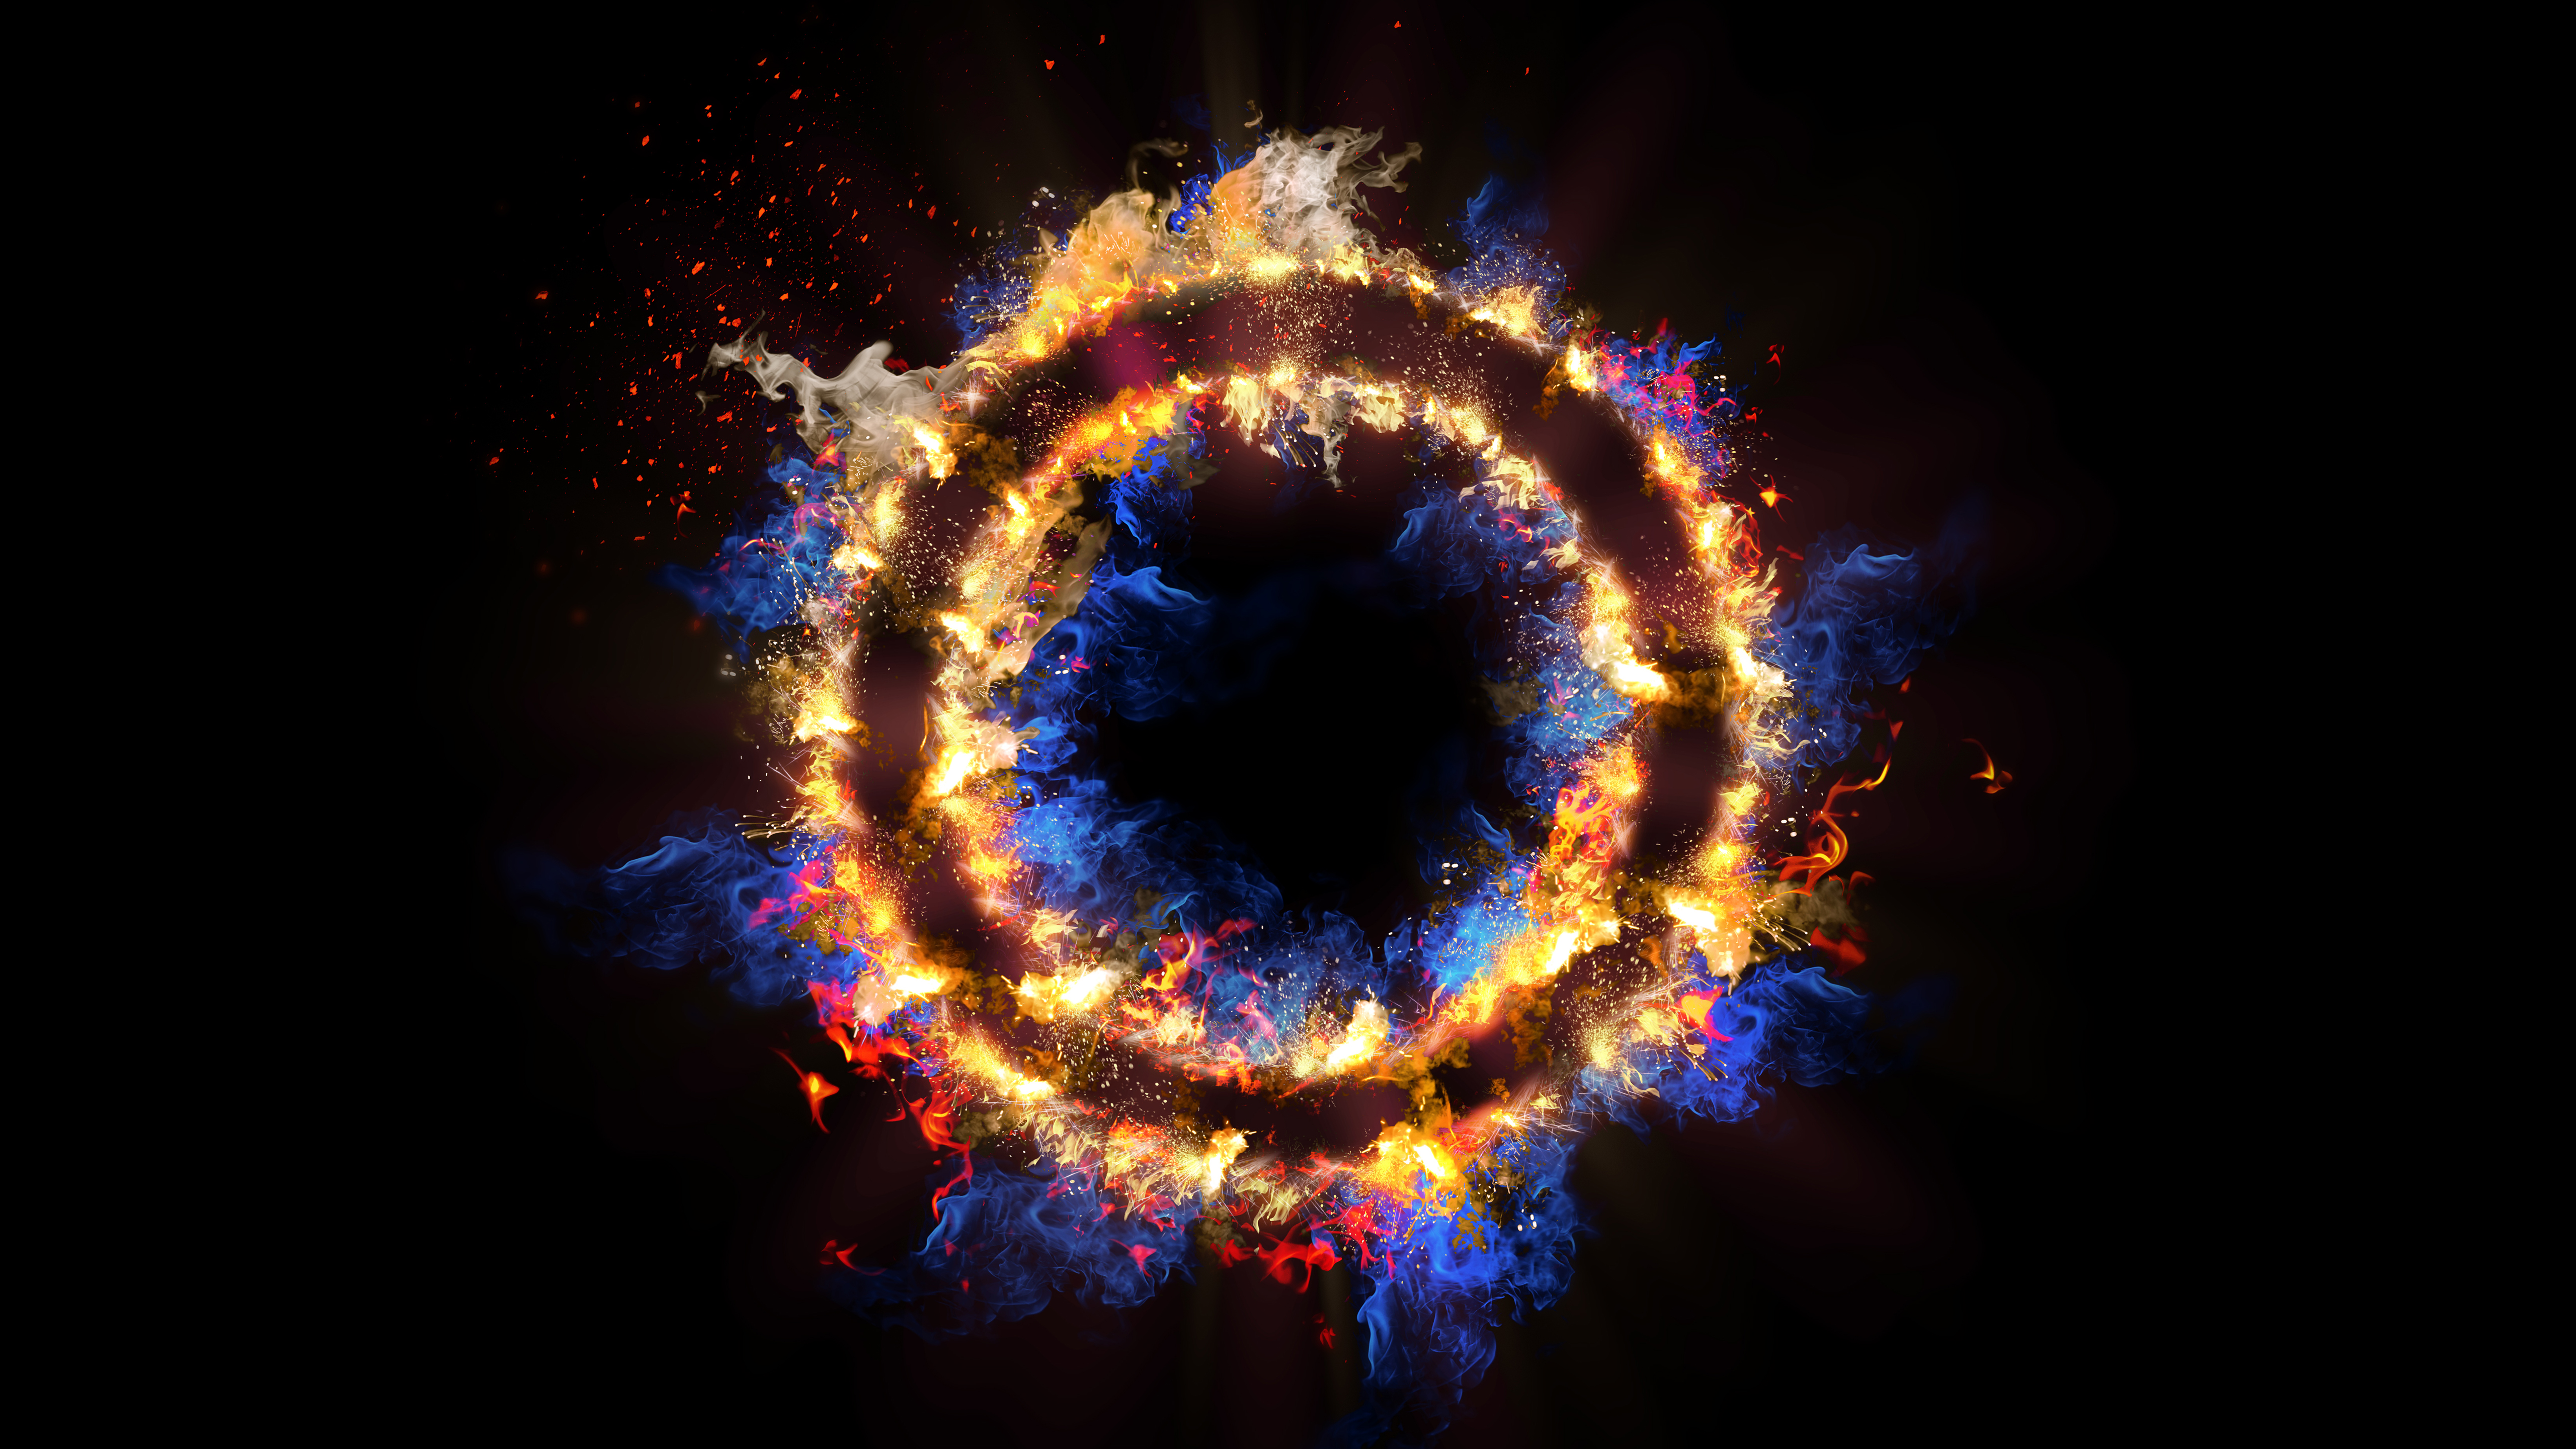 Fire ring Wallpaper 4K, Energy, Abstract, #1967